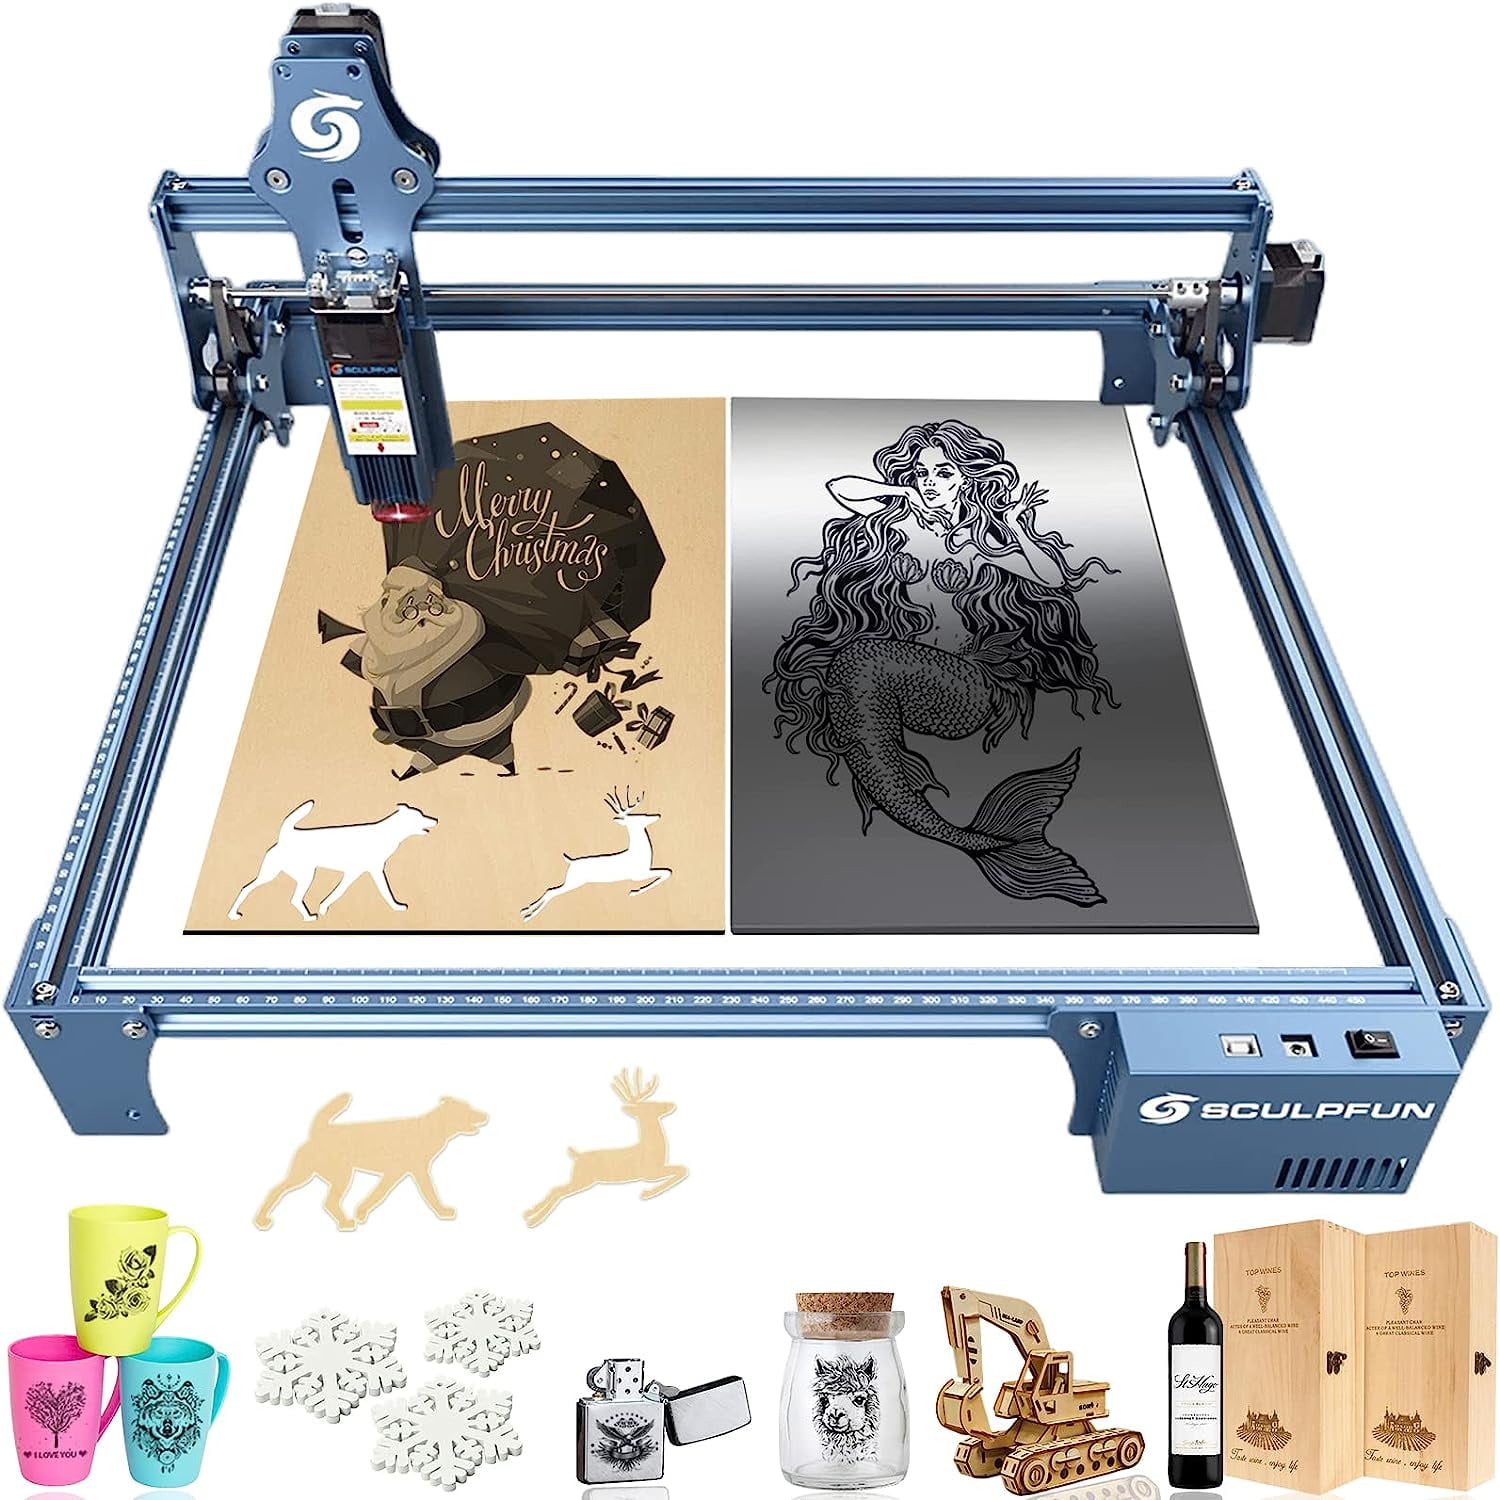 MR.CARVE C1 Engraver 5W Blue Light Cutting and Carving Machine with Auto  Focus 0.05 Accuracy 80x80mm Engraving Area Built-in Gyroscope Rotatable  Head Suitable for Paper Wood Leather 